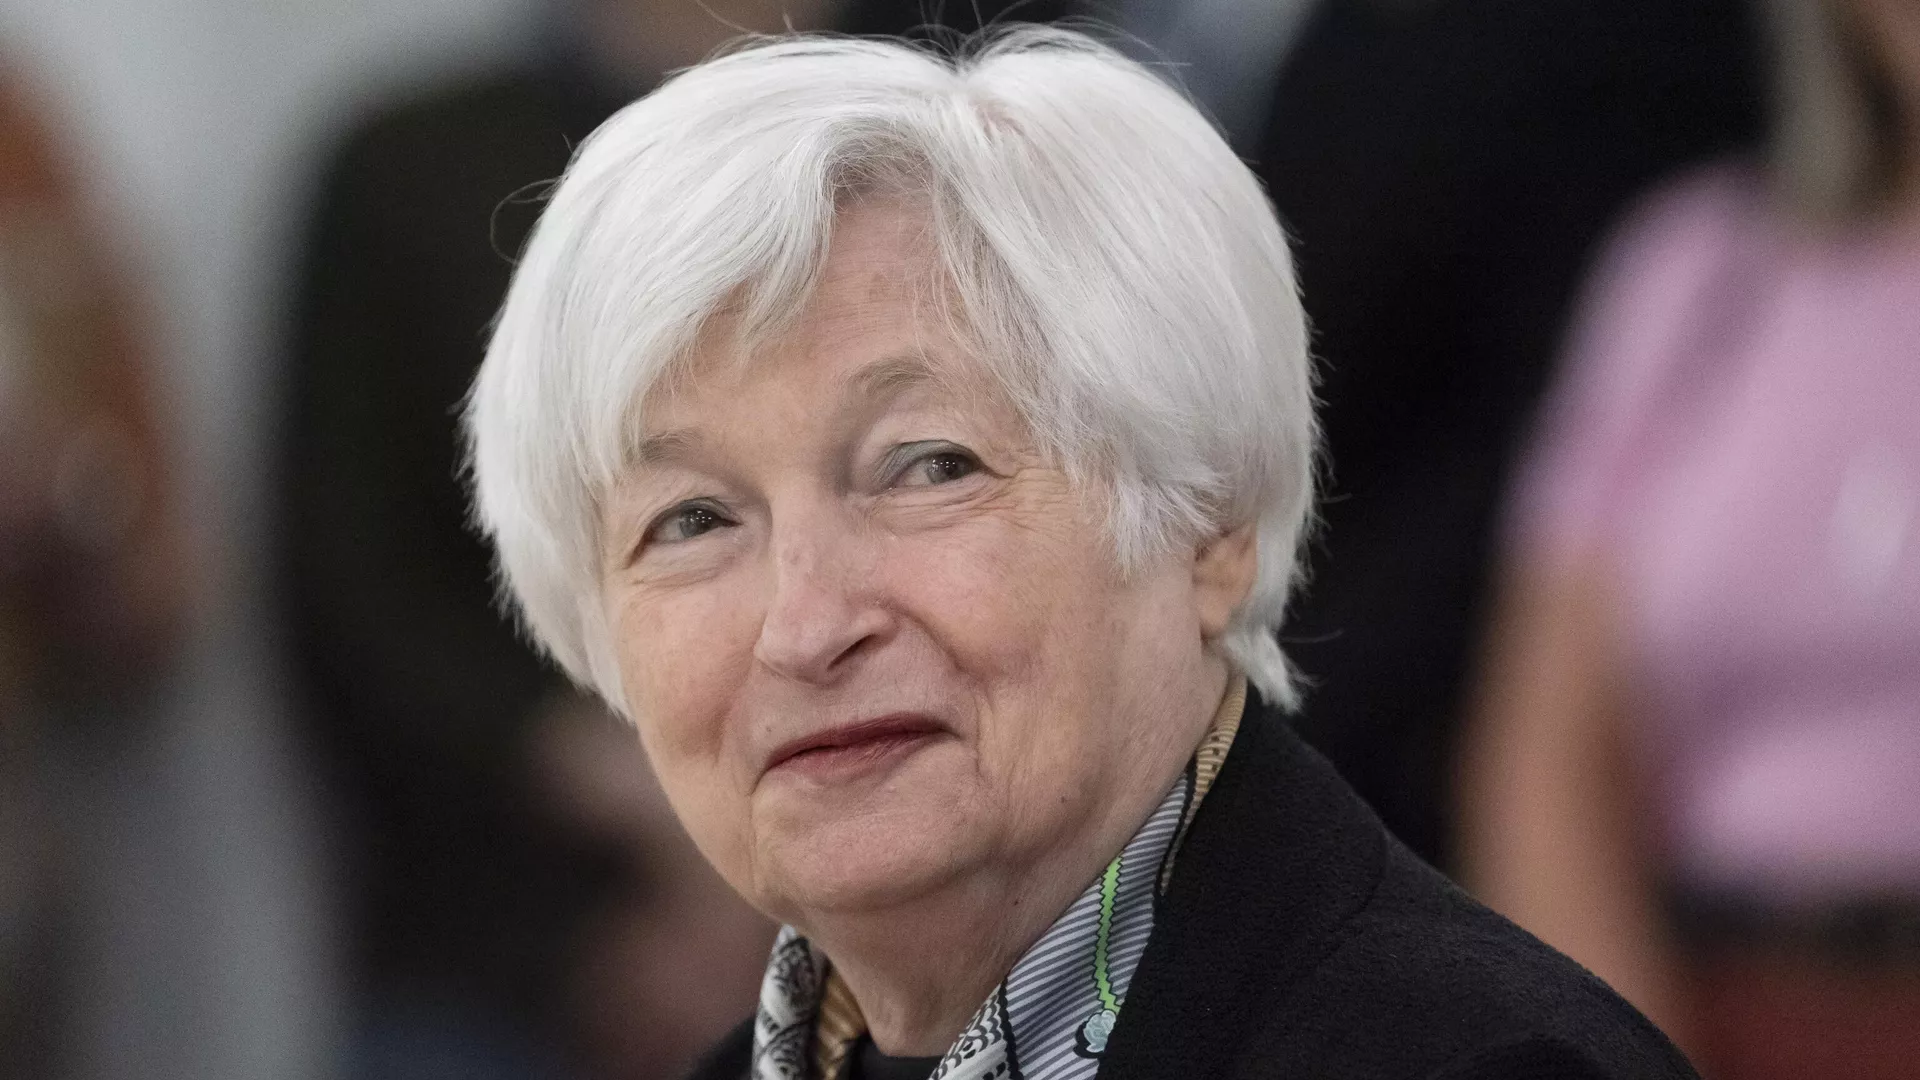 Yellen Confirms US Economy Has Acquired ‘Soft Landing’ Status After Recession Worries